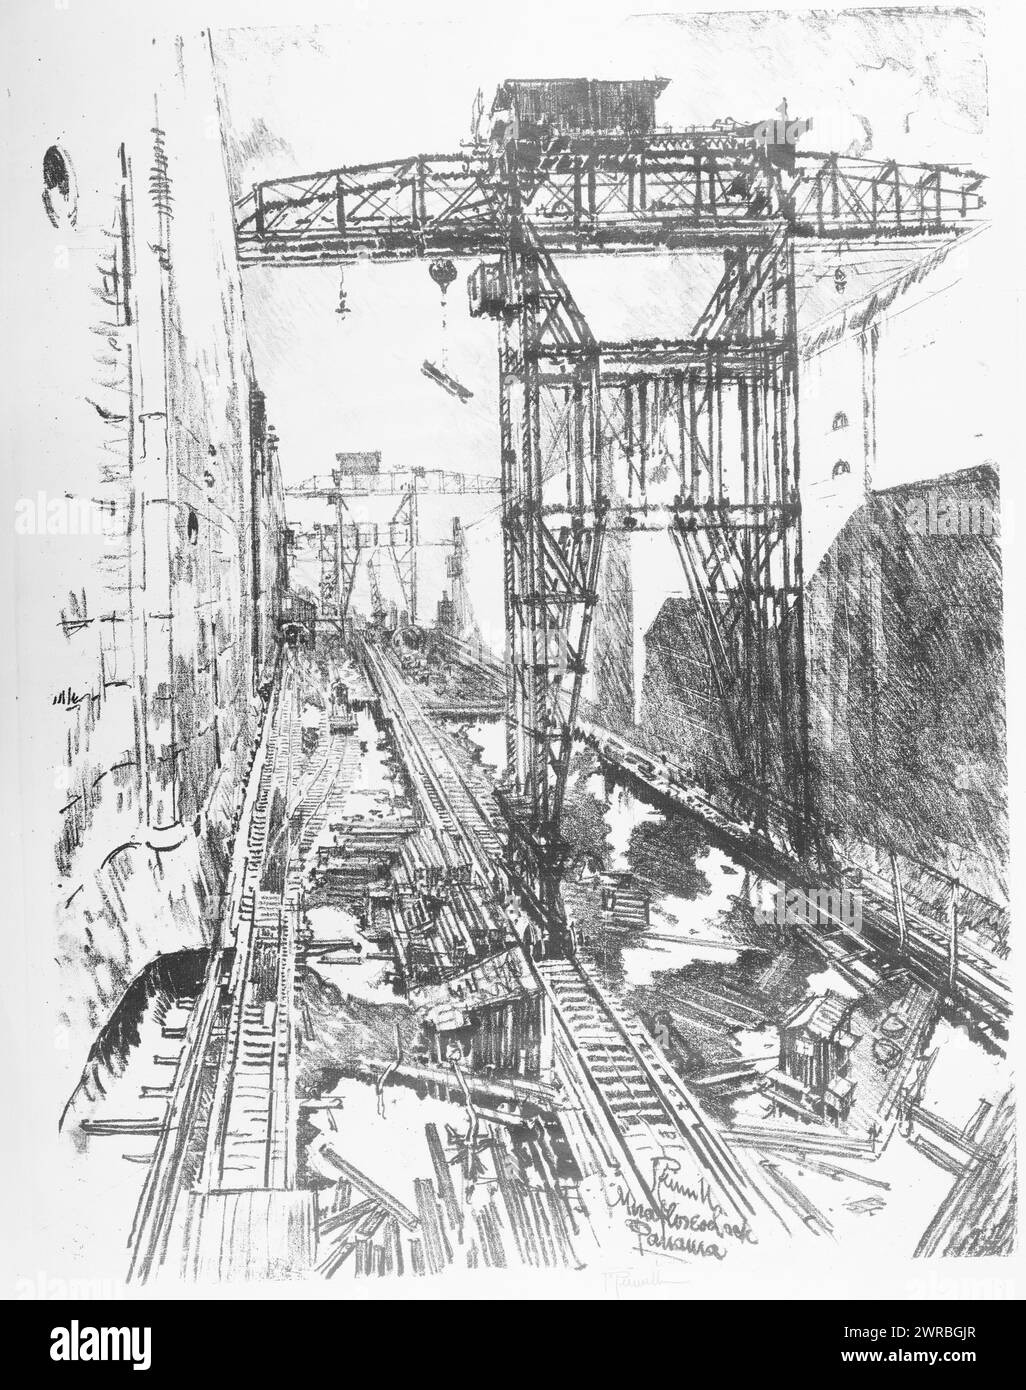 Great cranes in Miraflores Lock, Pennell, Joseph, 1857-1926, artist, 1912, Locks (Hydraulic engineering), Panama, Canal Zone, 1910-1920, Lithographs, 1910-1920., Lithographs, 1910-1920, 1 print: lithograph, 55.9 x 42.8 cm Stock Photo